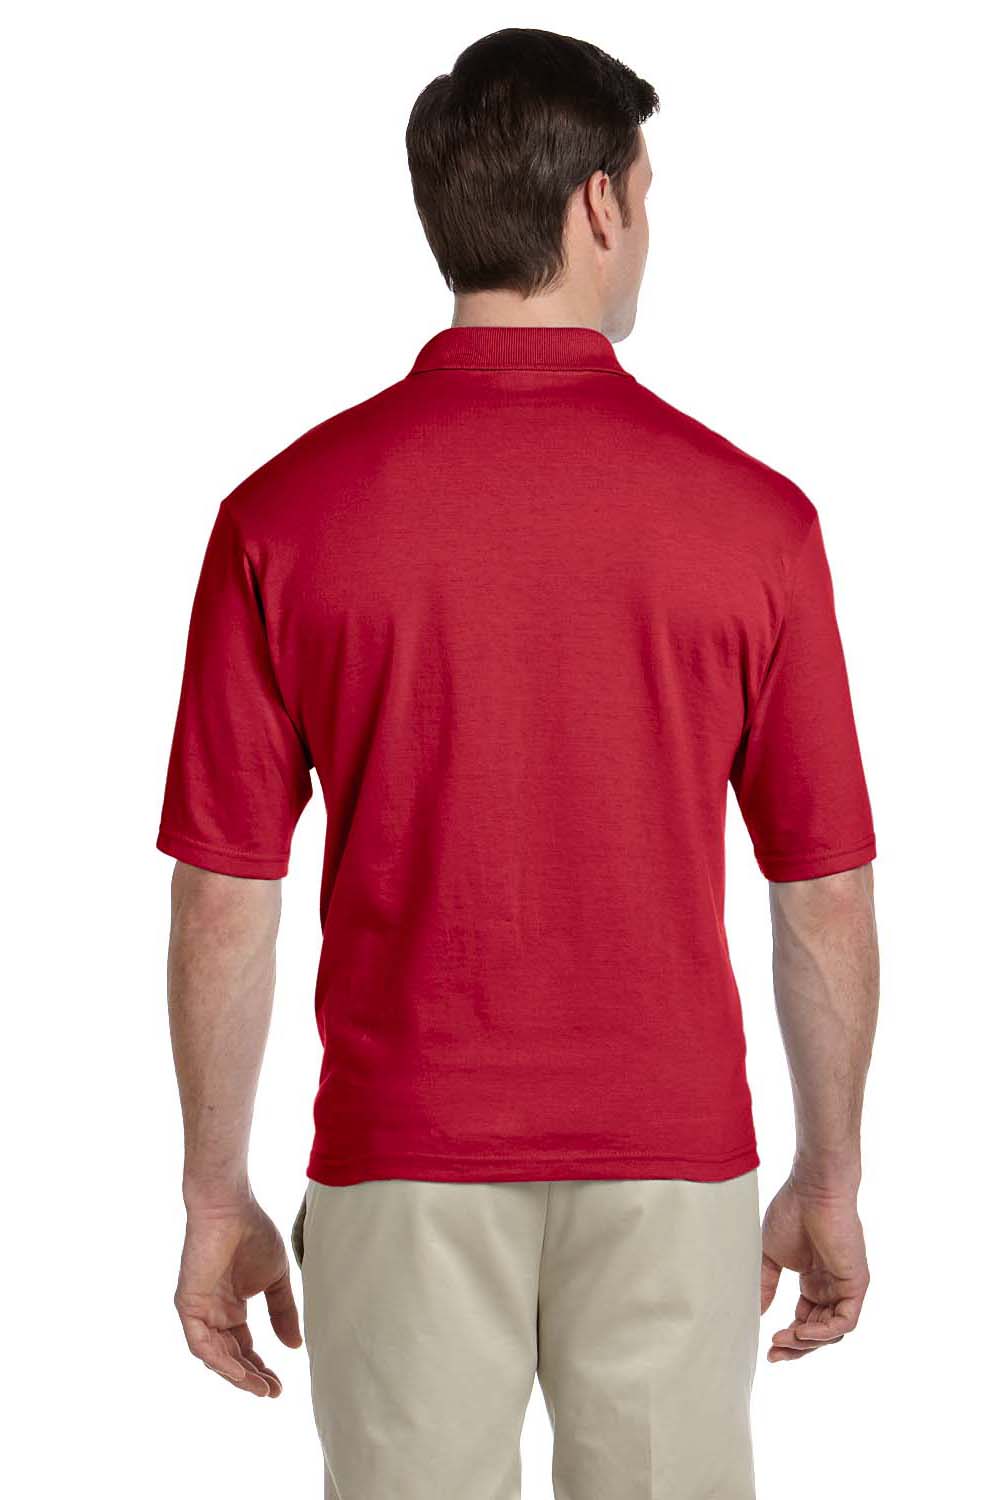 Jerzees 436P Mens SpotShield Stain Resistant Short Sleeve Polo Shirt w/ Pocket Red Back